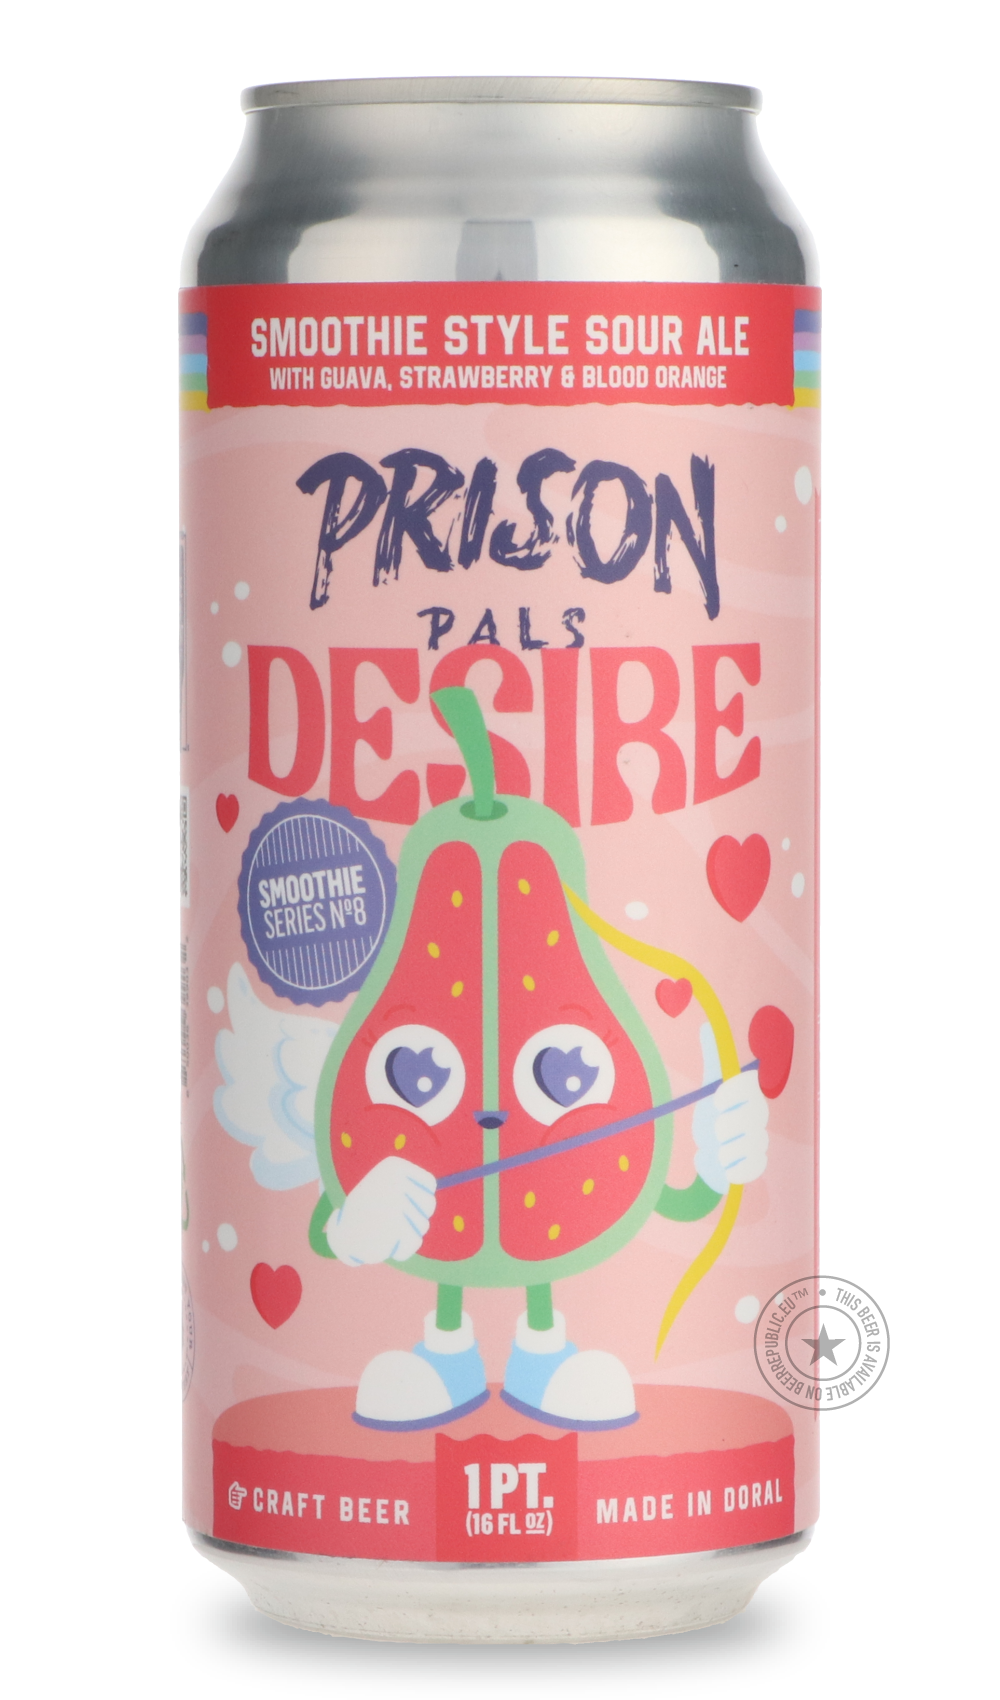 -Prison Pals- Desire-Sour / Wild & Fruity- Only @ Beer Republic - The best online beer store for American & Canadian craft beer - Buy beer online from the USA and Canada - Bier online kopen - Amerikaans bier kopen - Craft beer store - Craft beer kopen - Amerikanisch bier kaufen - Bier online kaufen - Acheter biere online - IPA - Stout - Porter - New England IPA - Hazy IPA - Imperial Stout - Barrel Aged - Barrel Aged Imperial Stout - Brown - Dark beer - Blond - Blonde - Pilsner - Lager - Wheat - Weizen - Amb